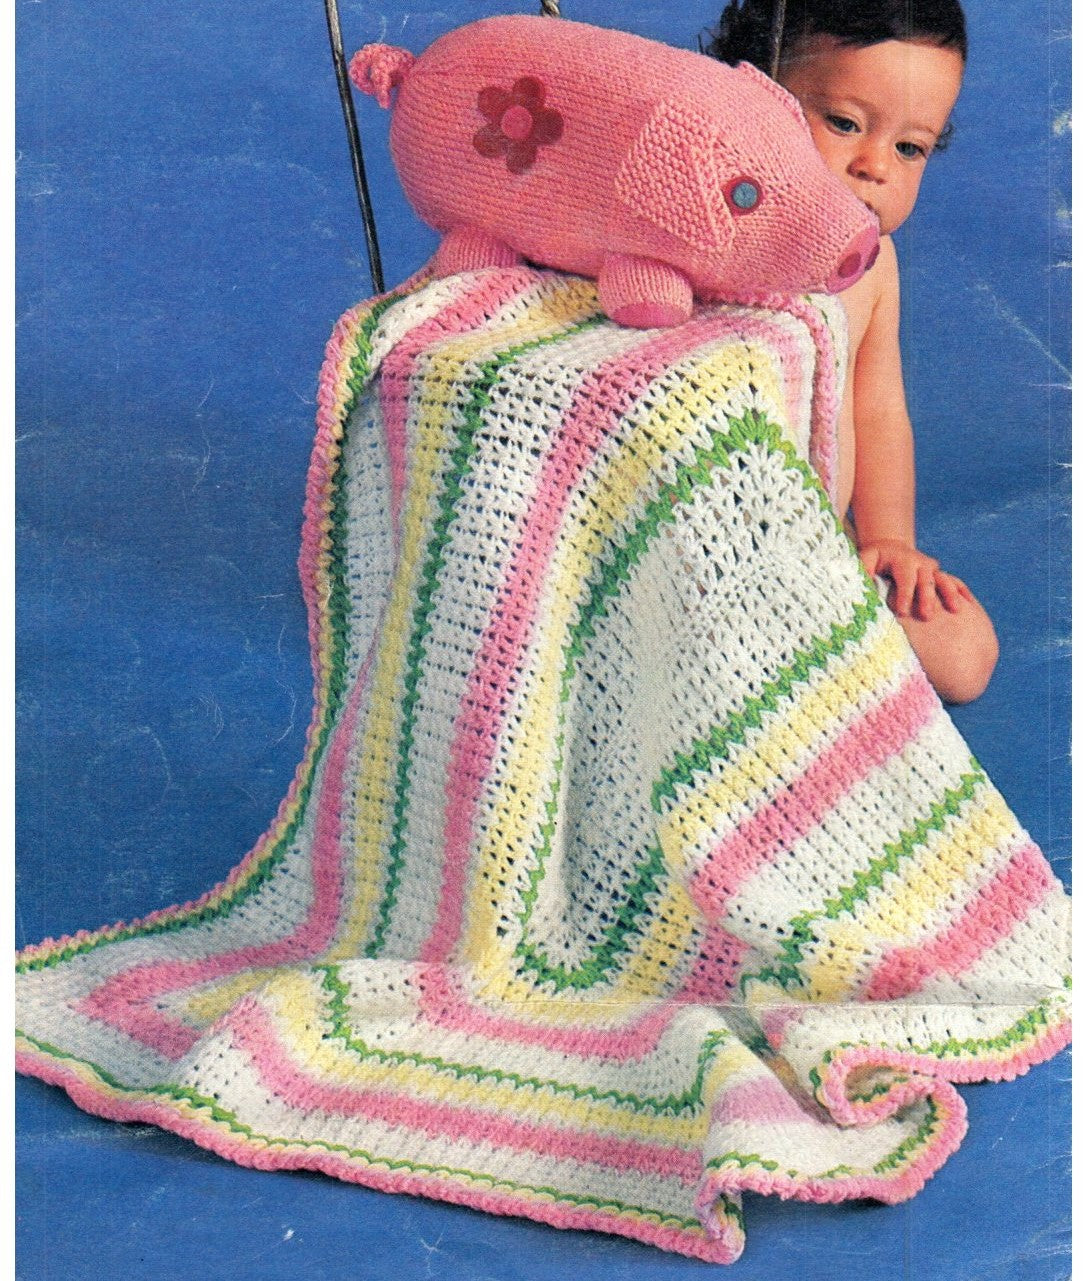 Vintage Baby Sweater Set Pattern Crochet Knit  Baby Blanket Afghan Pig Plush Toy Needle Craft Downloadable Pattern Pdf Pattern - At Grandma's Table